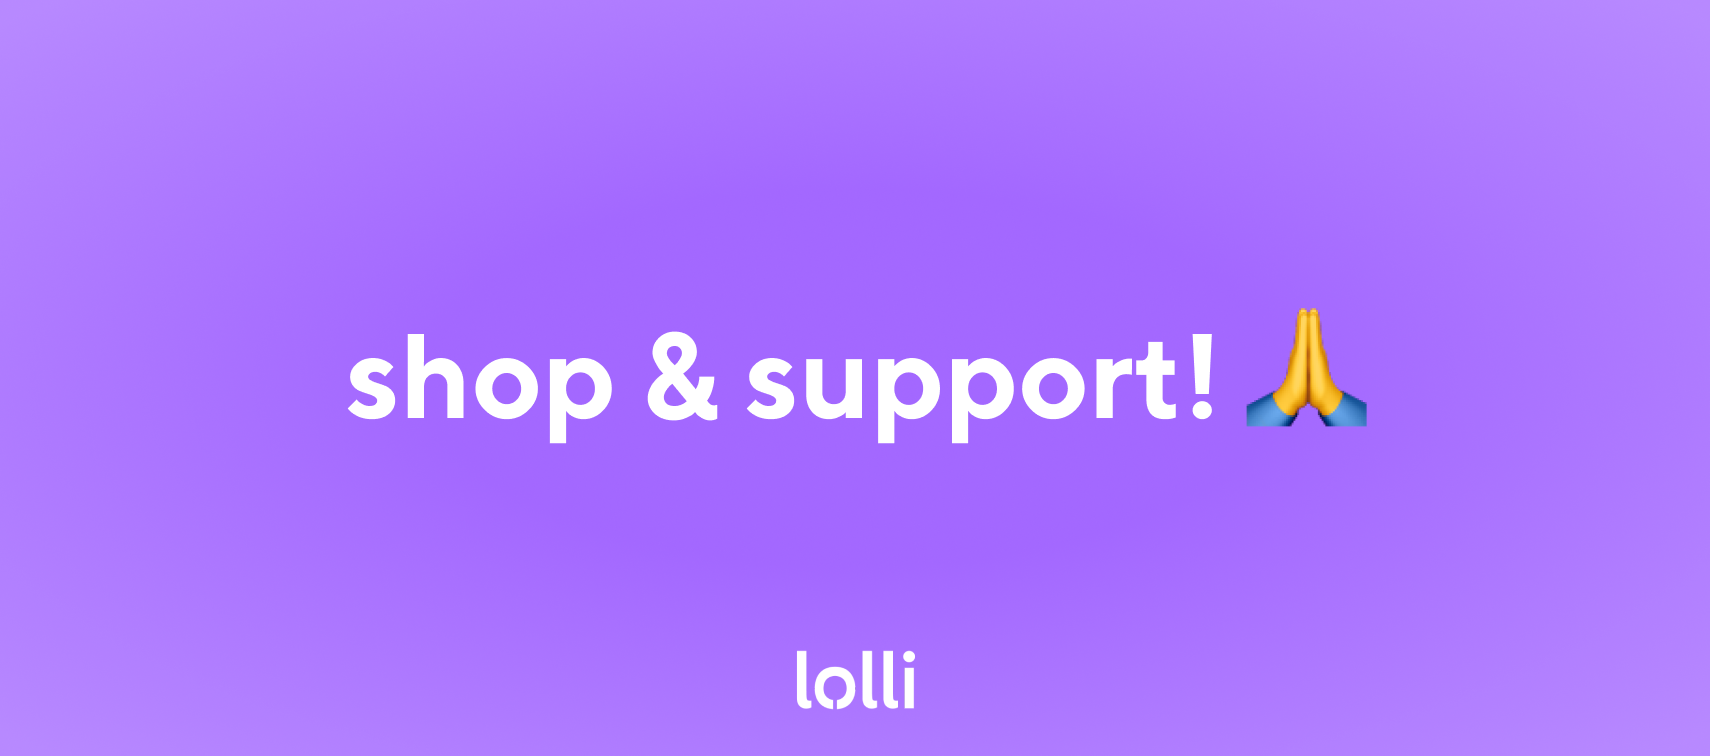 Shop Using Lolli & Support Bitcoin Open Source Developers! 🚀